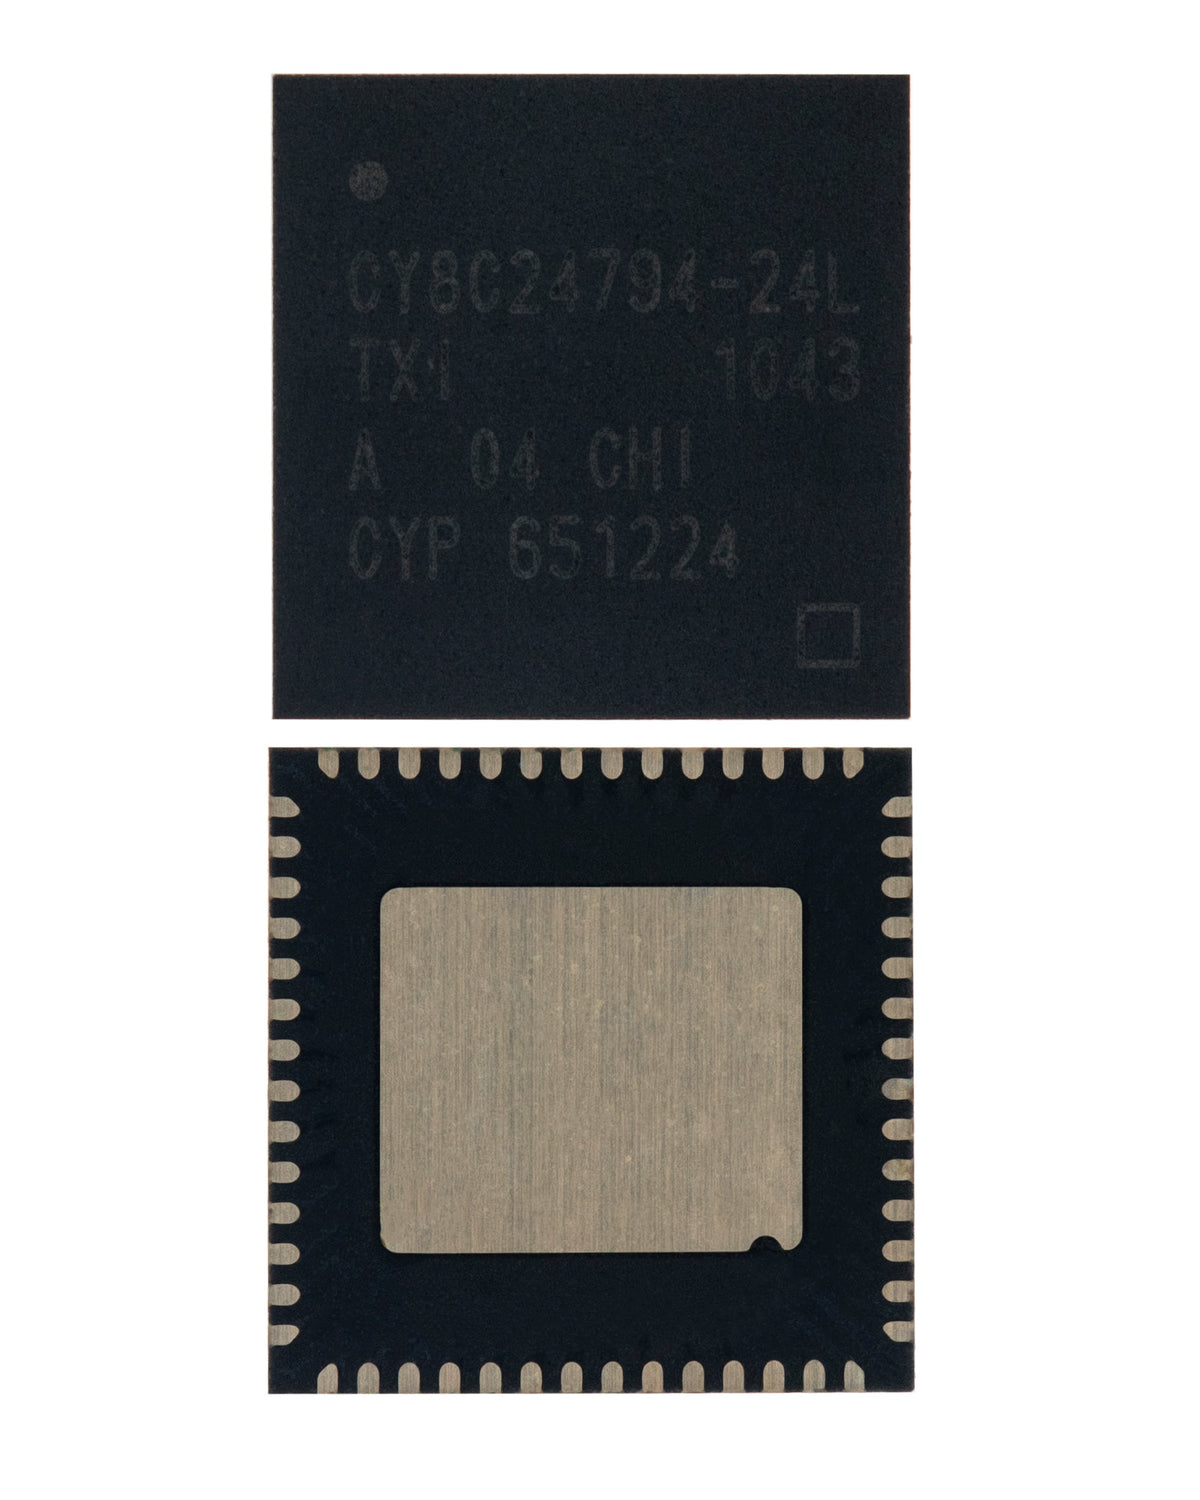 PROGRAMMABLE SYSTEM-ON IC COMPATIBLE WITH MACBOOK PRO (CY8C24794 / CY8C24794-24L / CY8C24794-24LTXI: QFN-56 PIN)